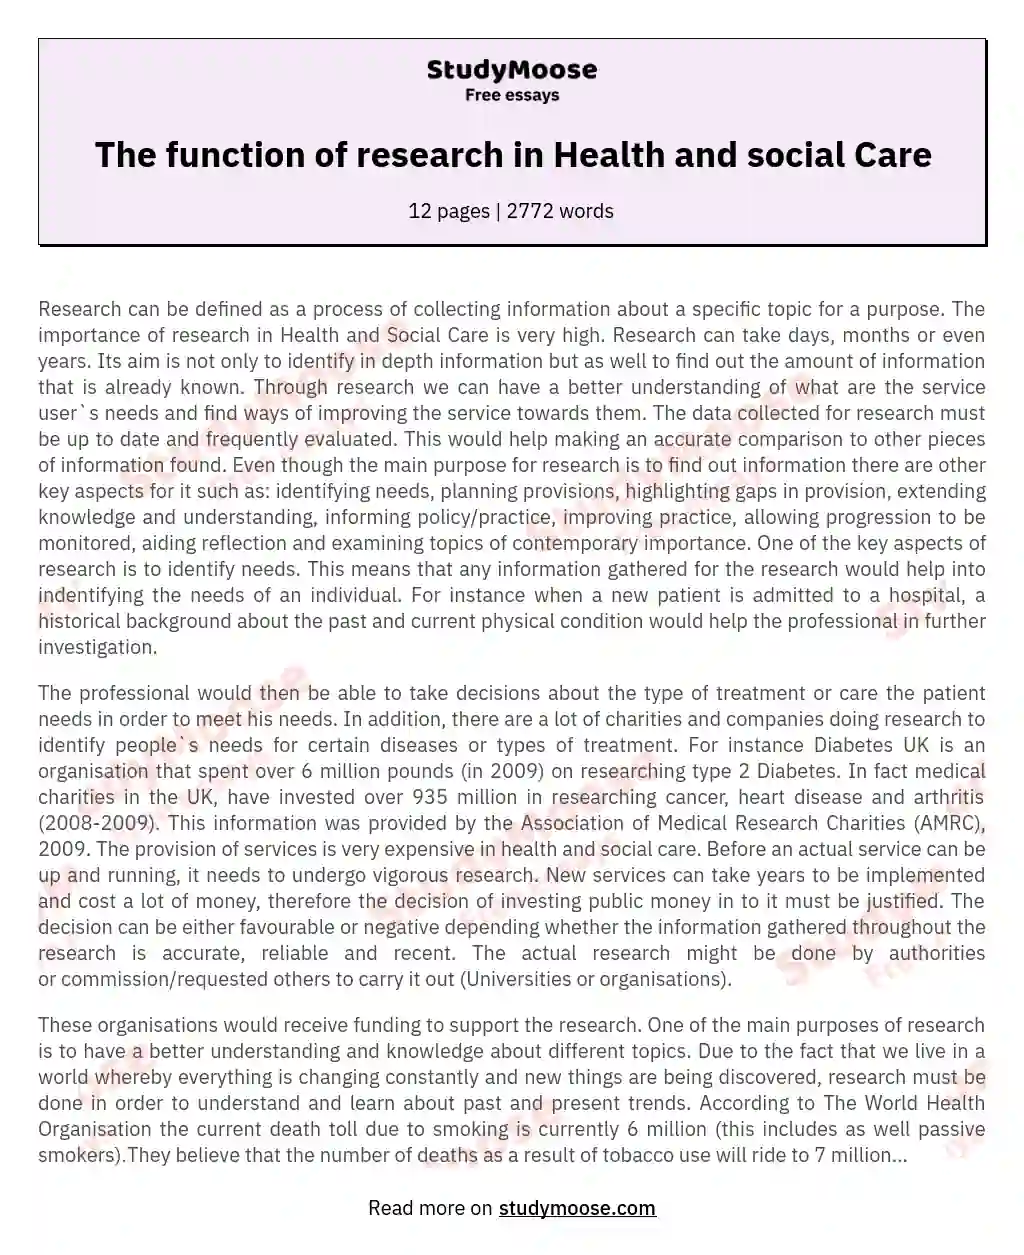 The function of research in Health and social Care essay